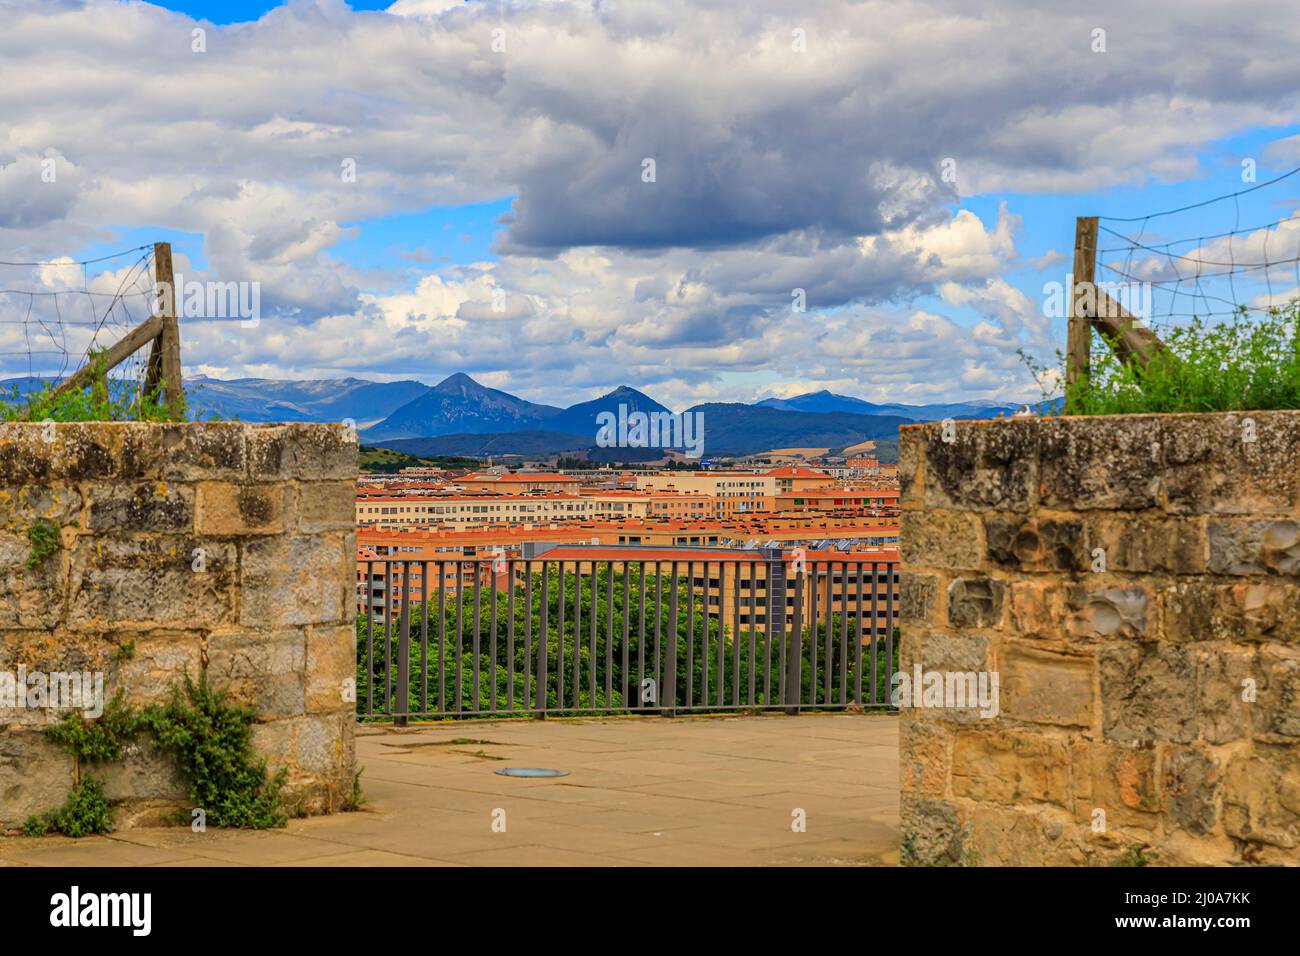 Walls of the citadel, medieval fortifications with a view of a residential district in Pamplona, Navarra, Spain famous for the running of the bulls Stock Photo